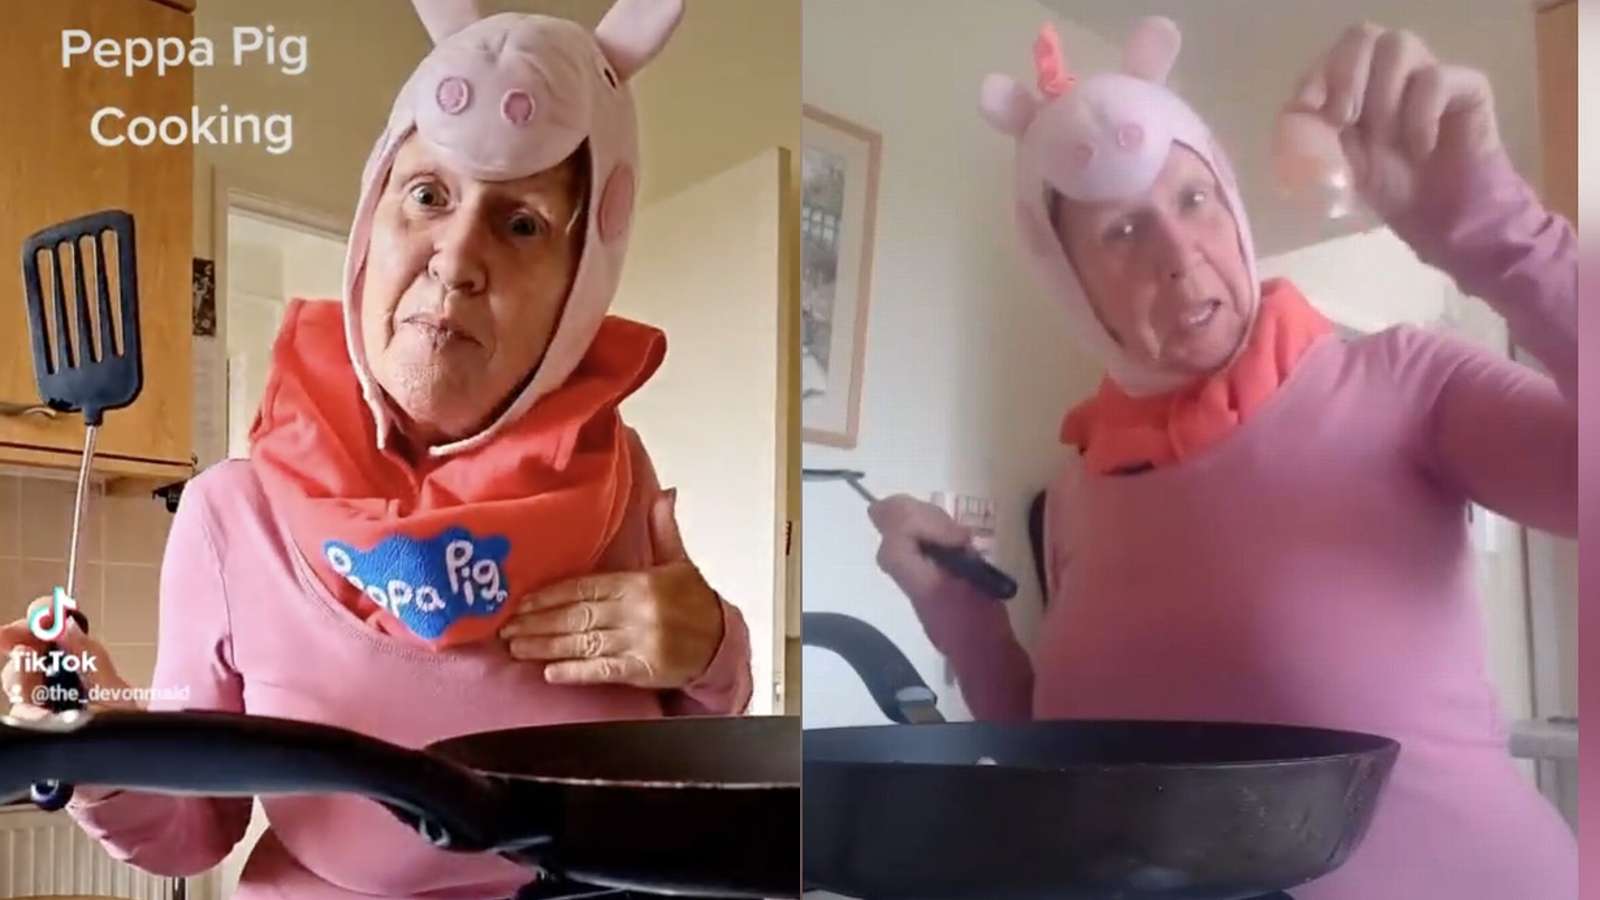 woman cooking bacon in peppa pig costume